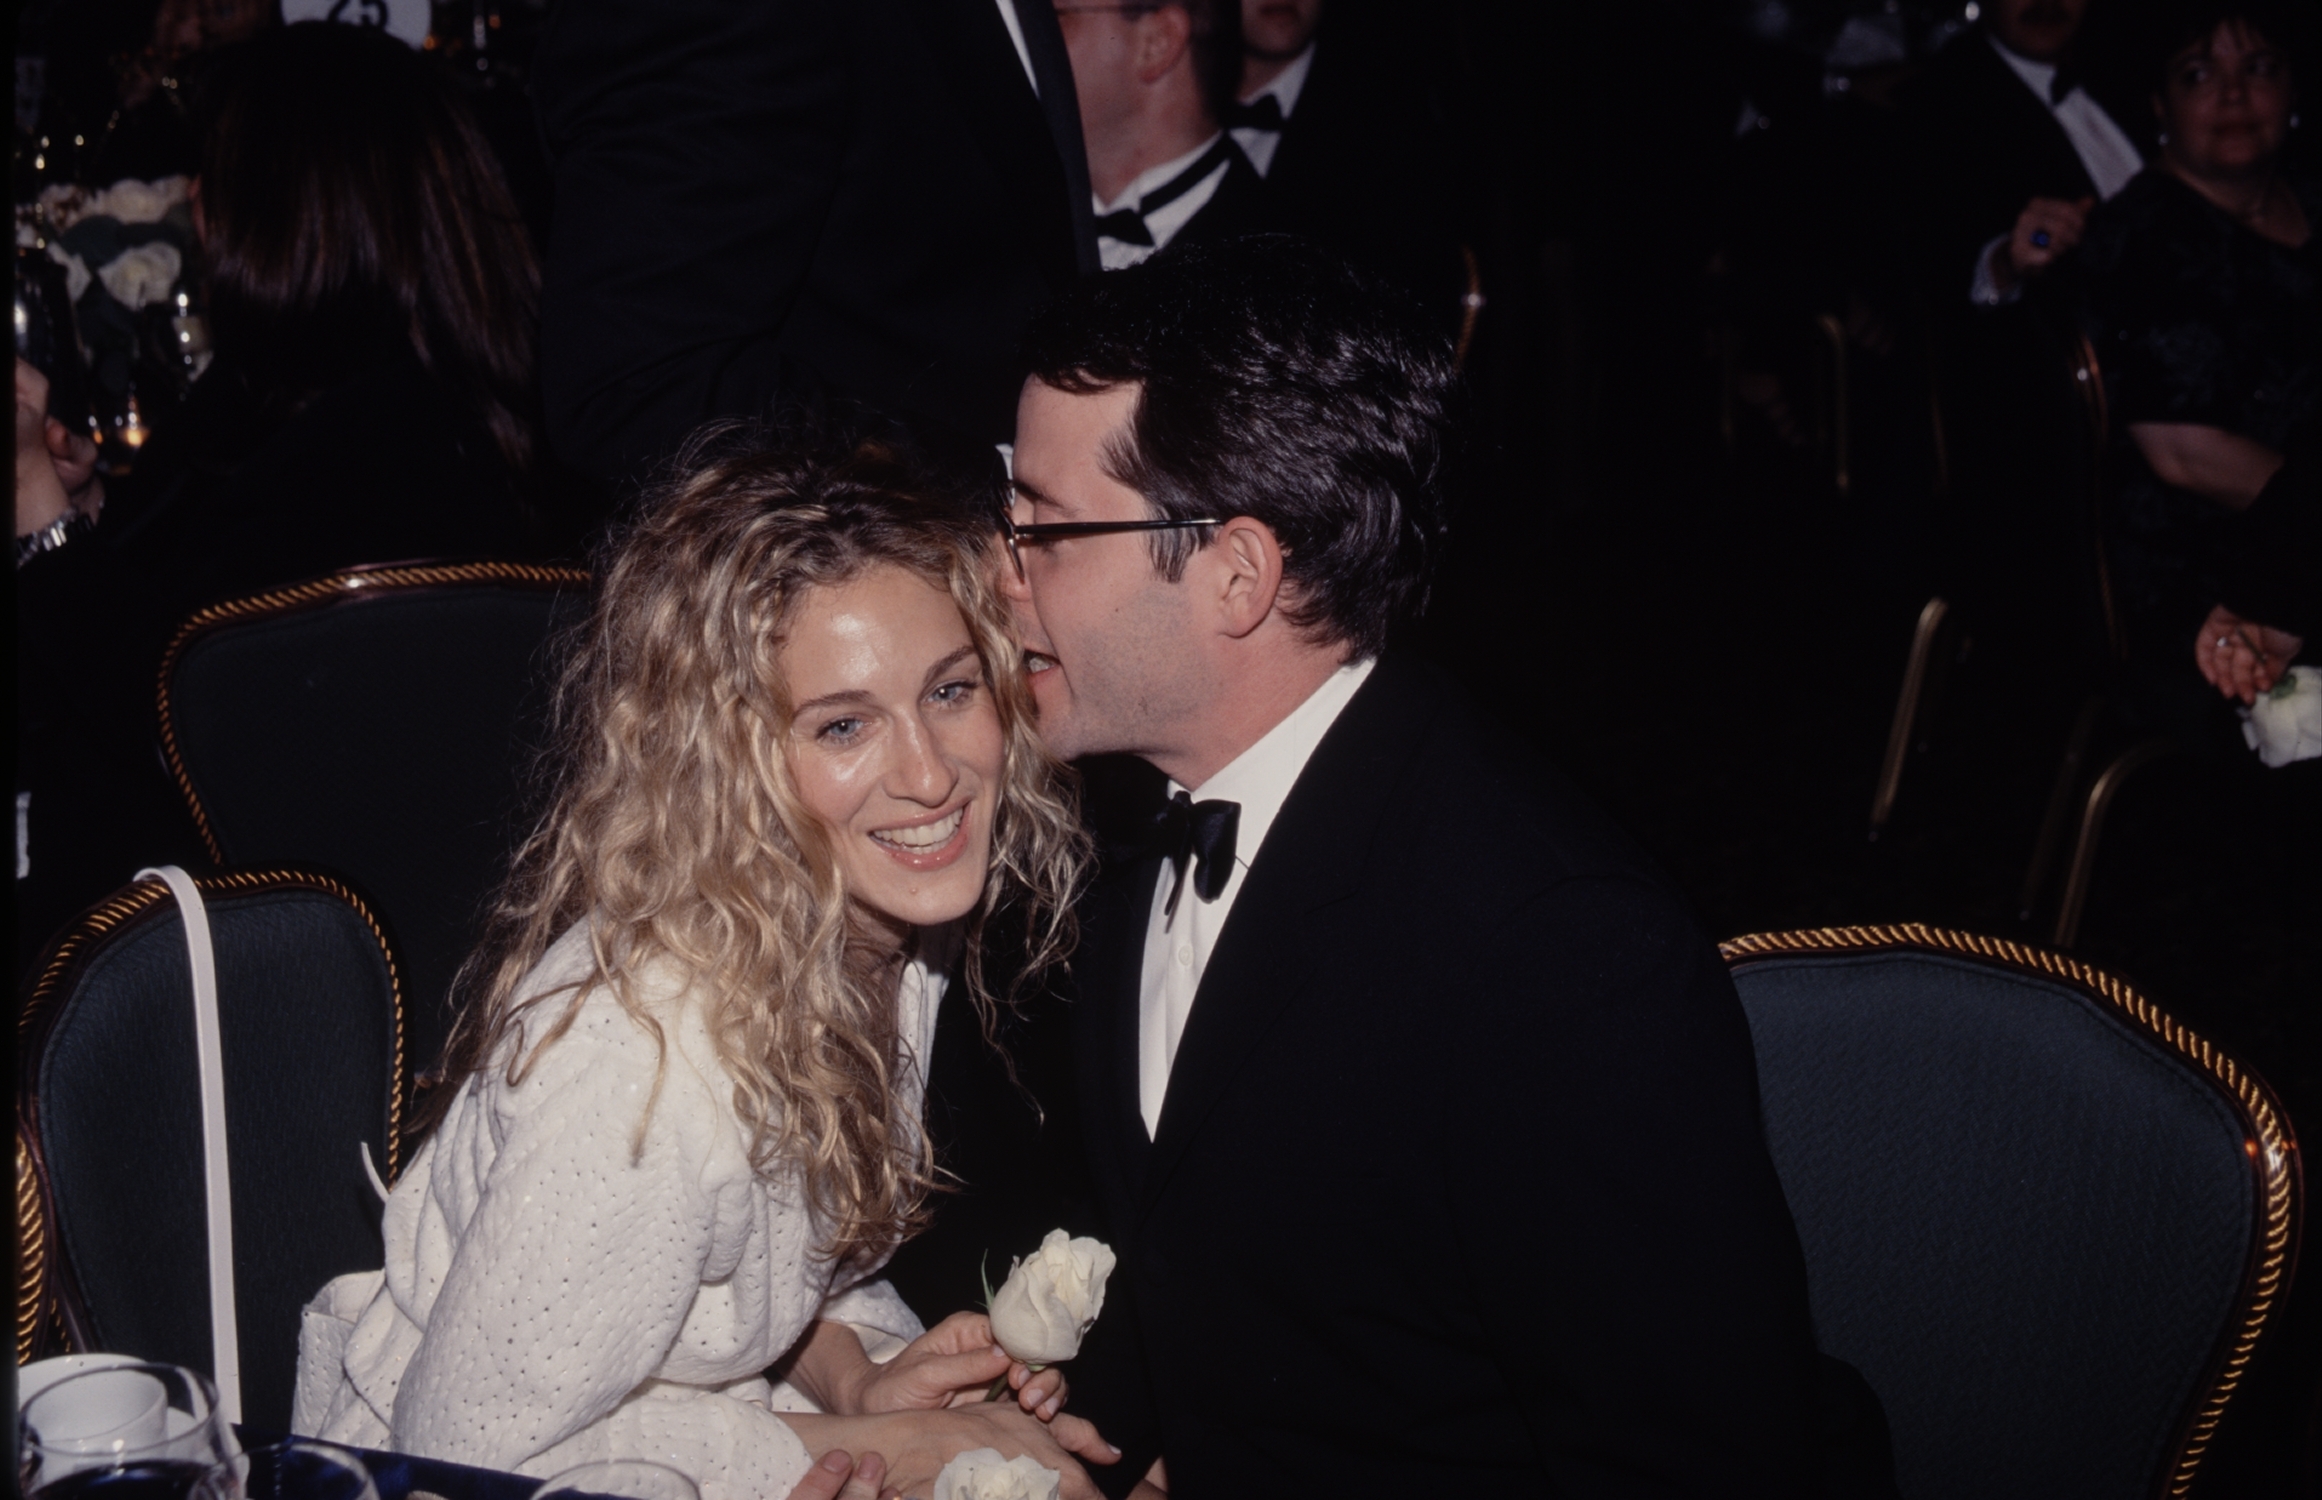 Sarah Jessica Parker smiling while her husband, Matthew Broderick, whispers in her ear at an event.